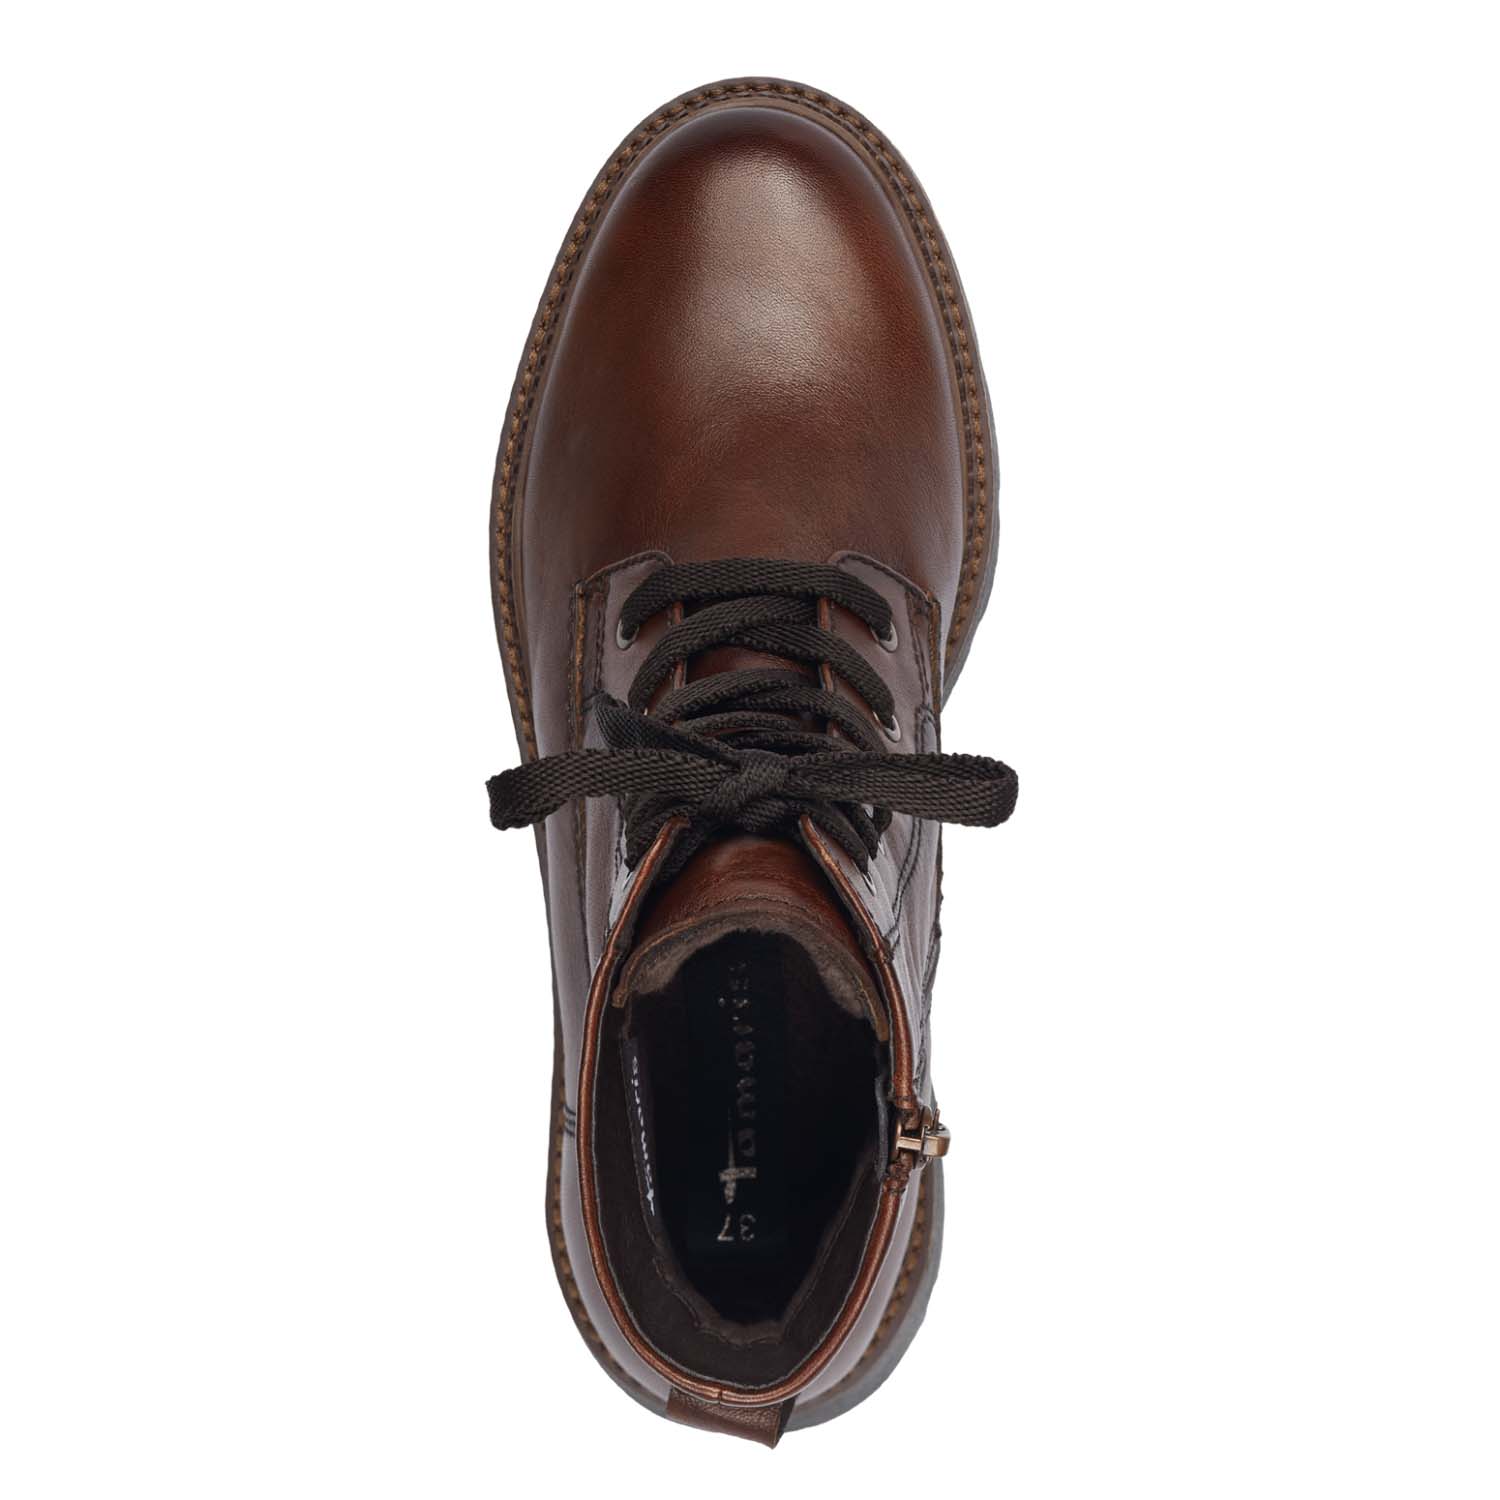 Top view of Tamaris leather brown lace up boot.